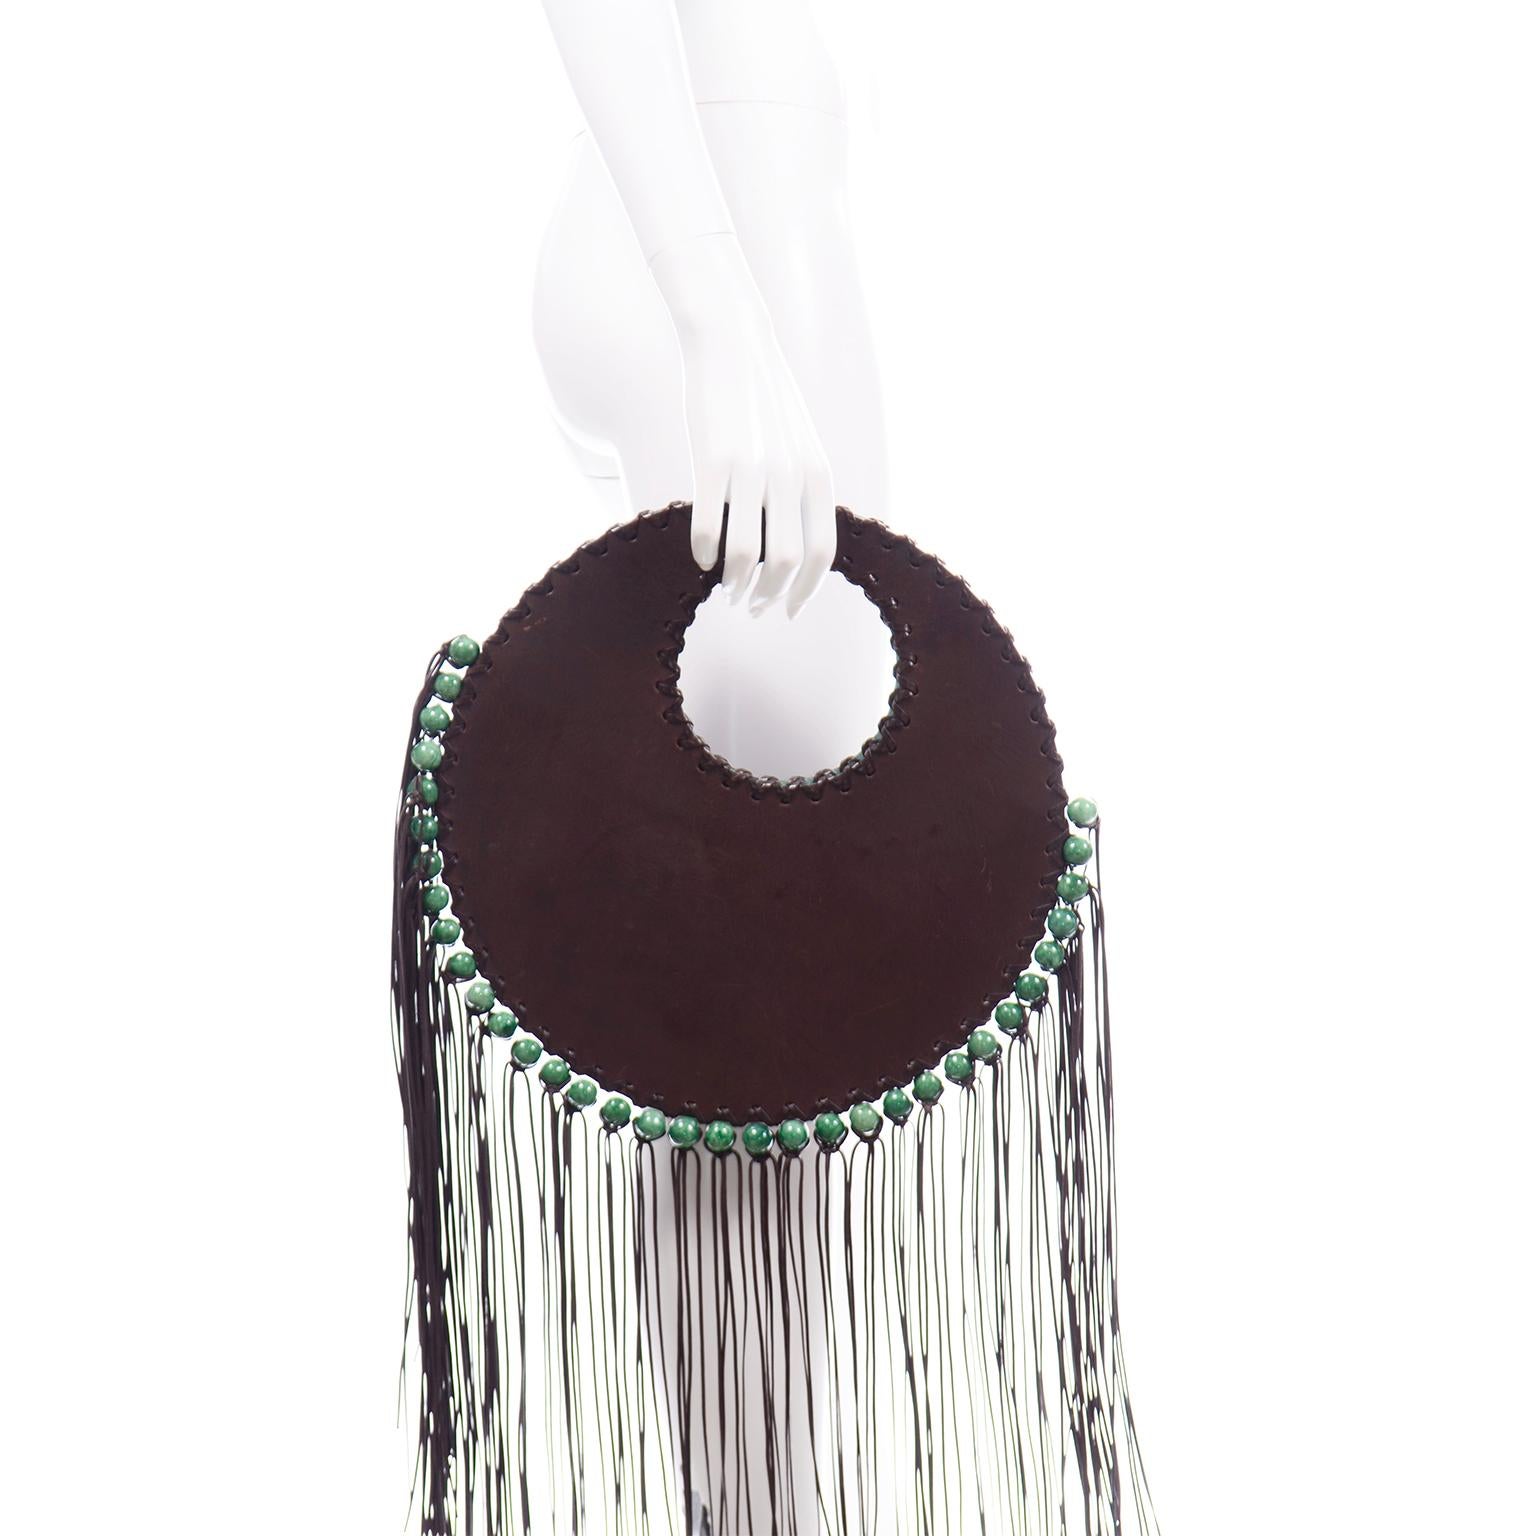 Black Denise Razzouk Round Brown Leather Handbag With Green Beads and Long Fringe